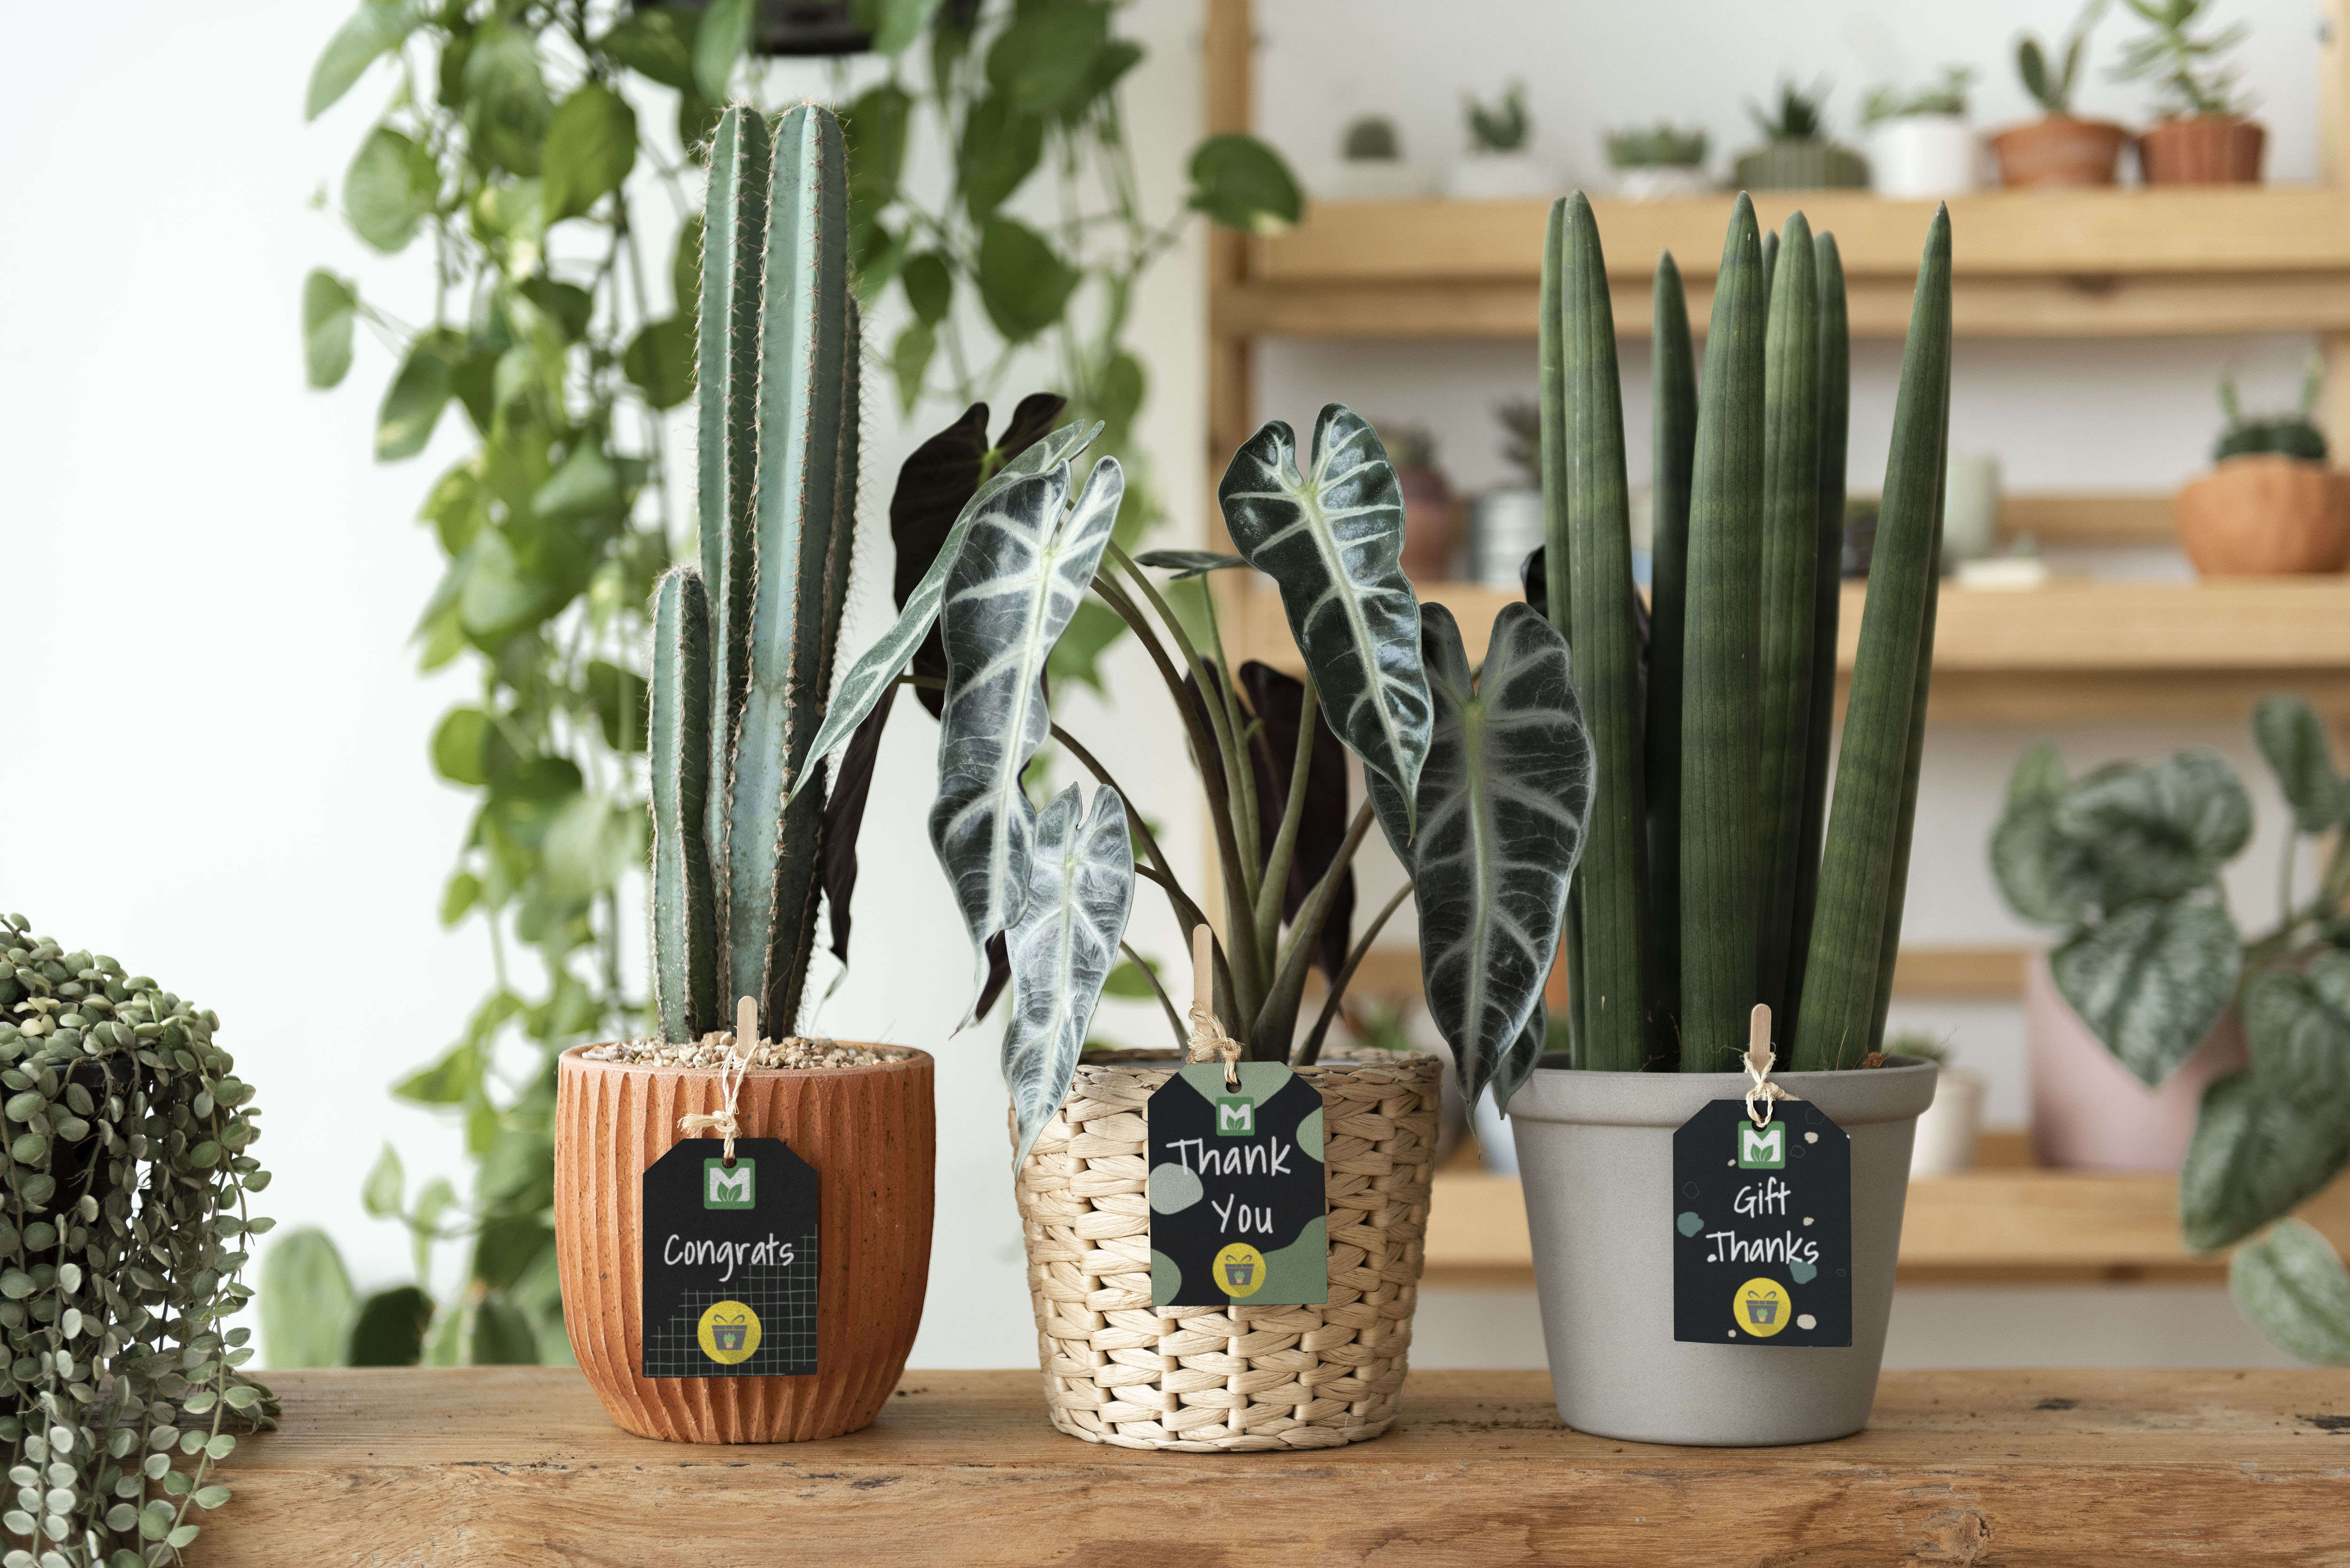 If You're Concerned About the Planet, Turn to Eco Friendly Return Gifts  Like Plants! 10